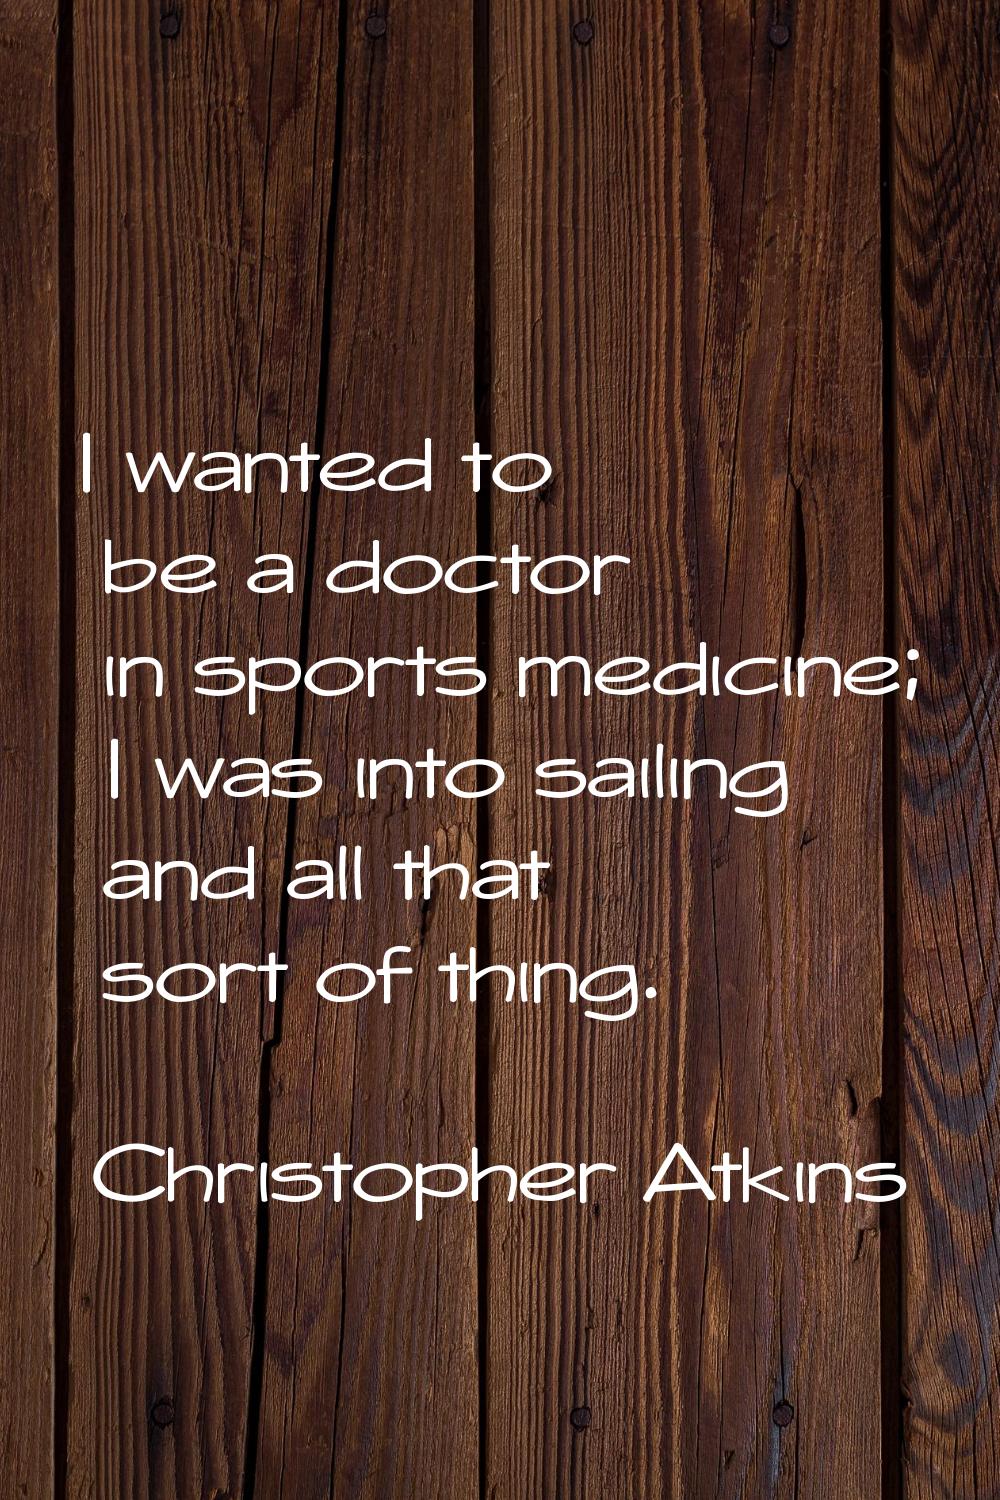 I wanted to be a doctor in sports medicine; I was into sailing and all that sort of thing.